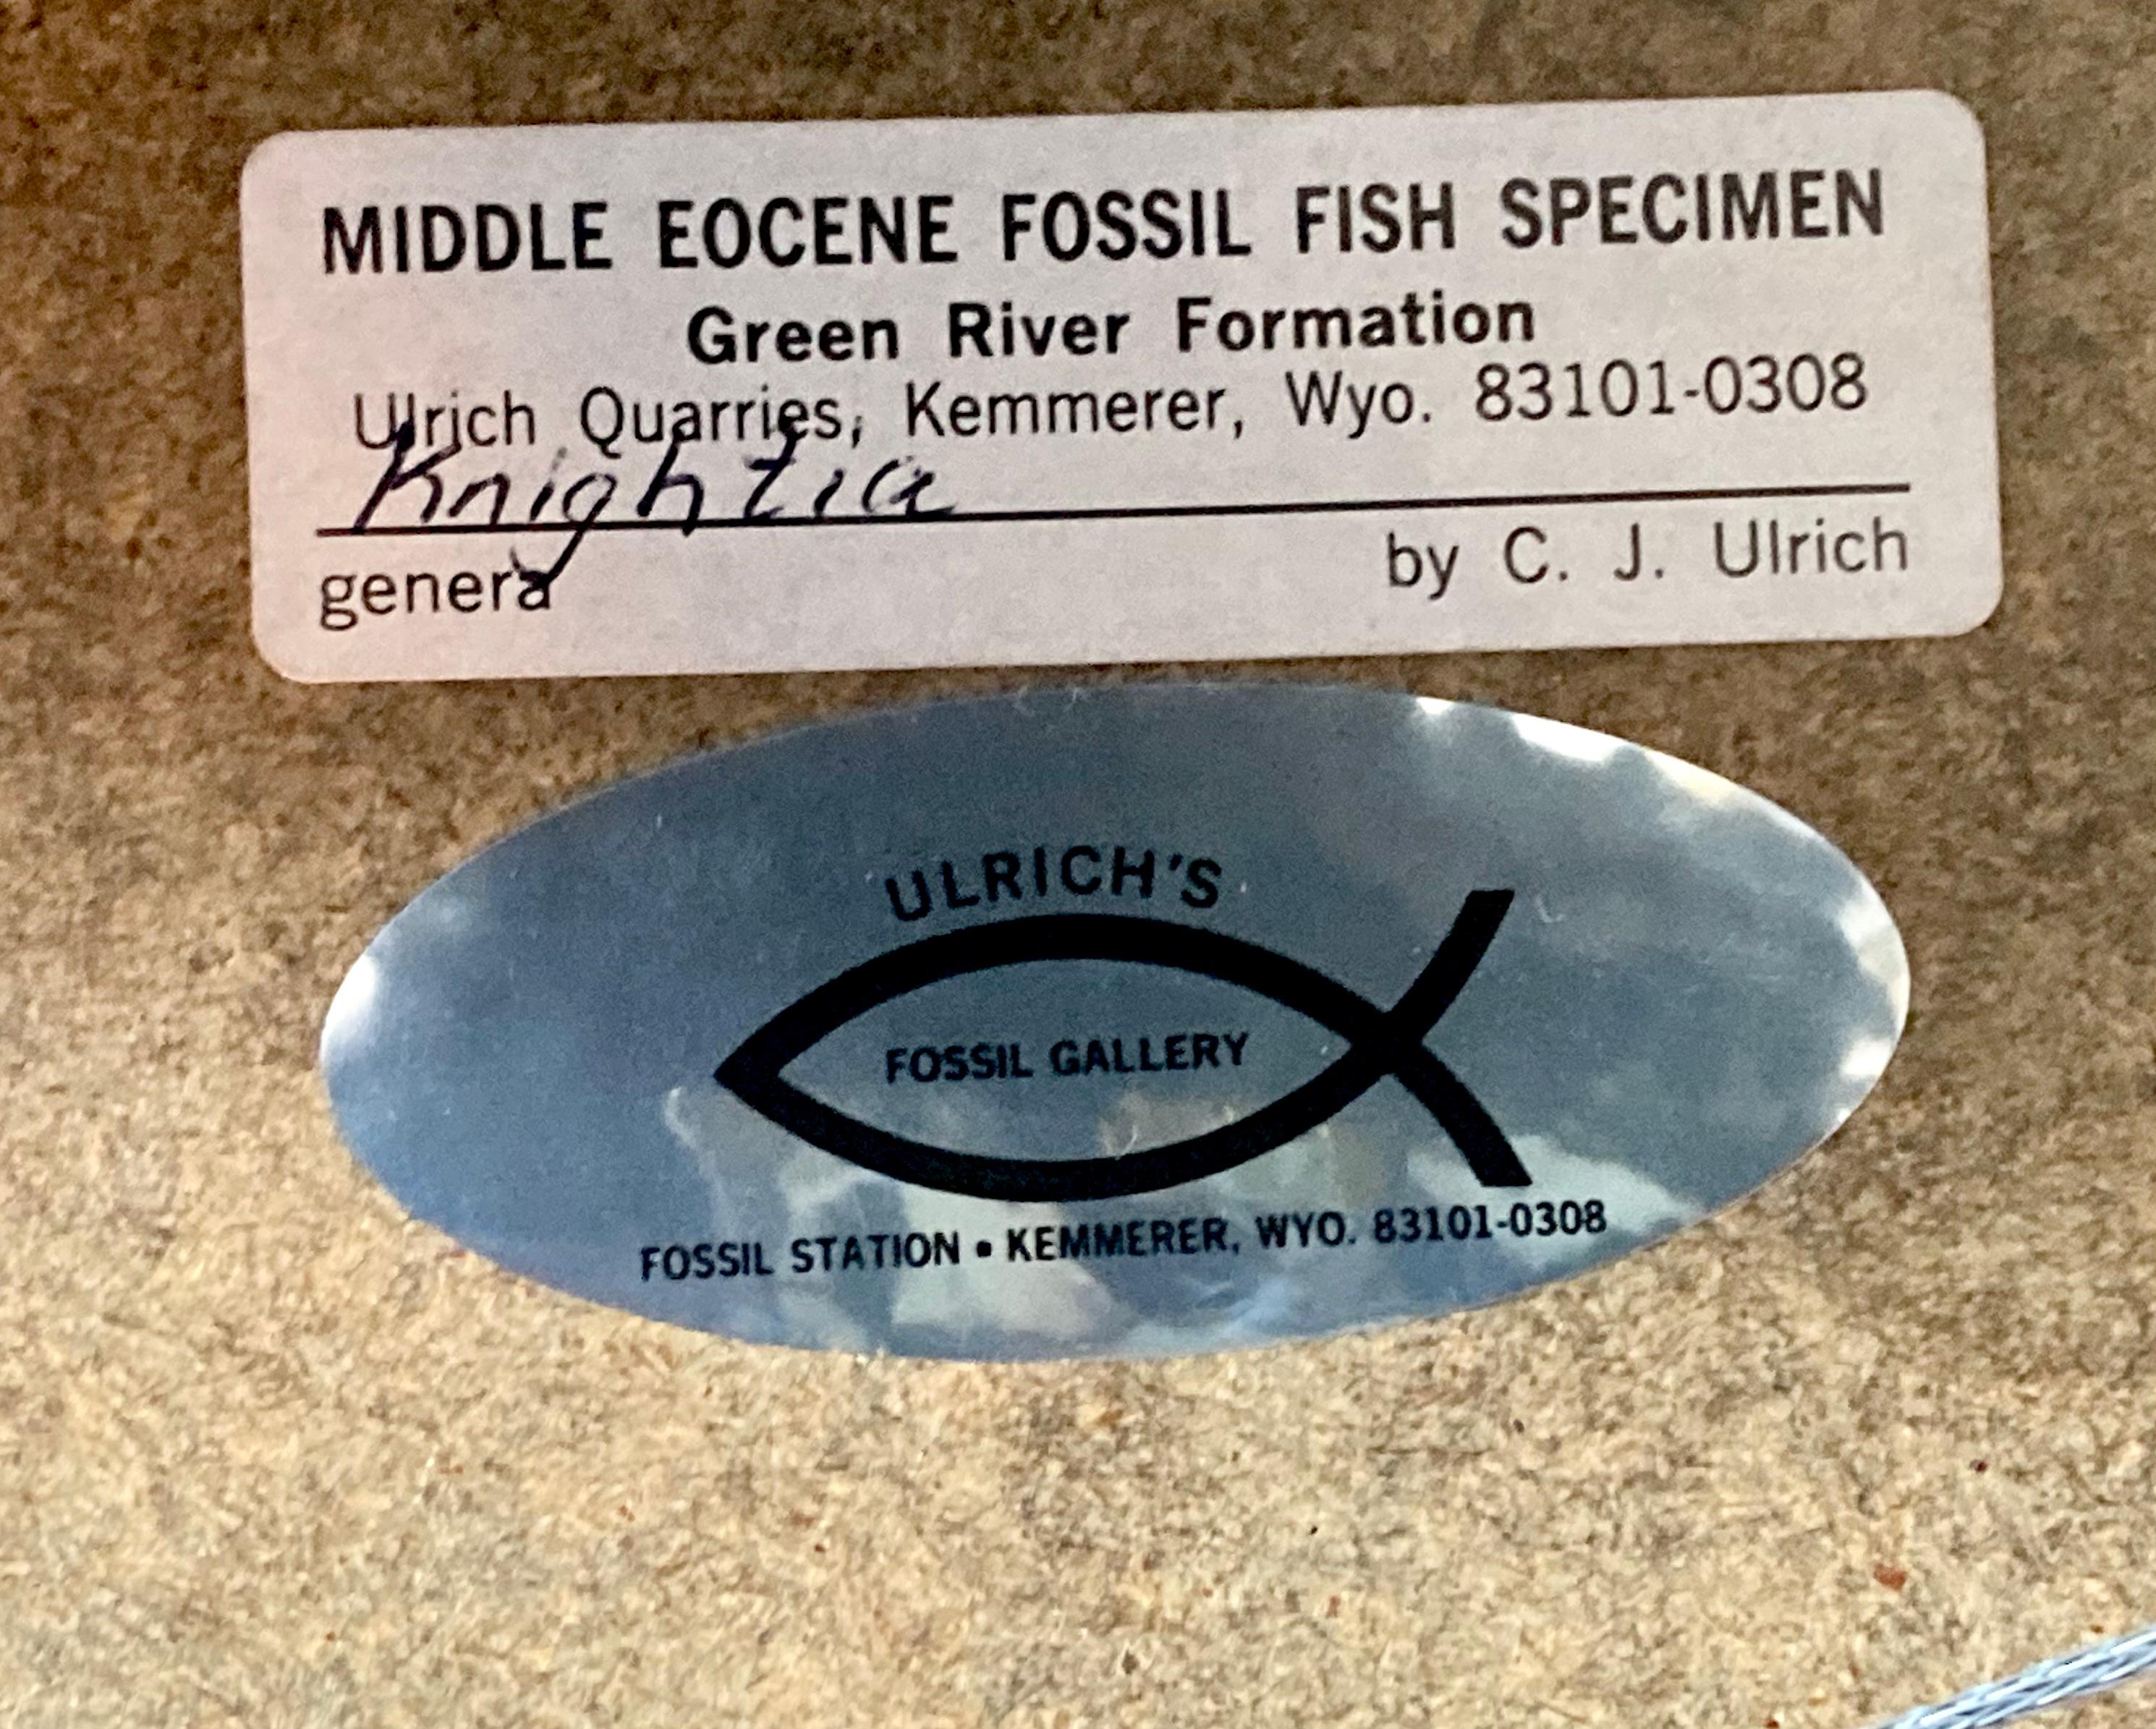 C.J. ULRICH
Fish fossil
in excellent condition
measures 18x12